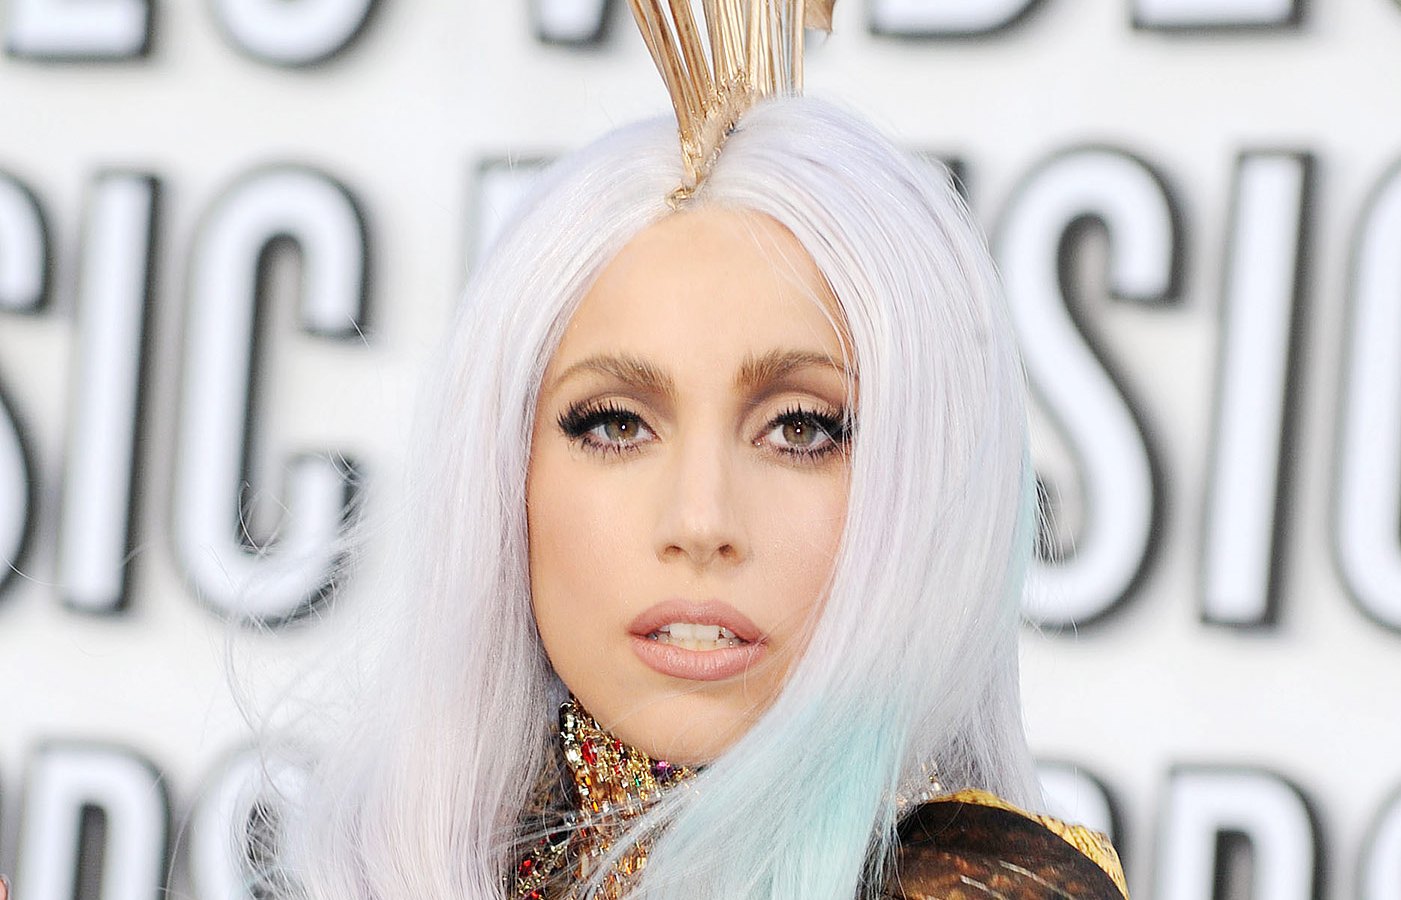 Lady Gaga attends the 2010 MTV Video Music Awards